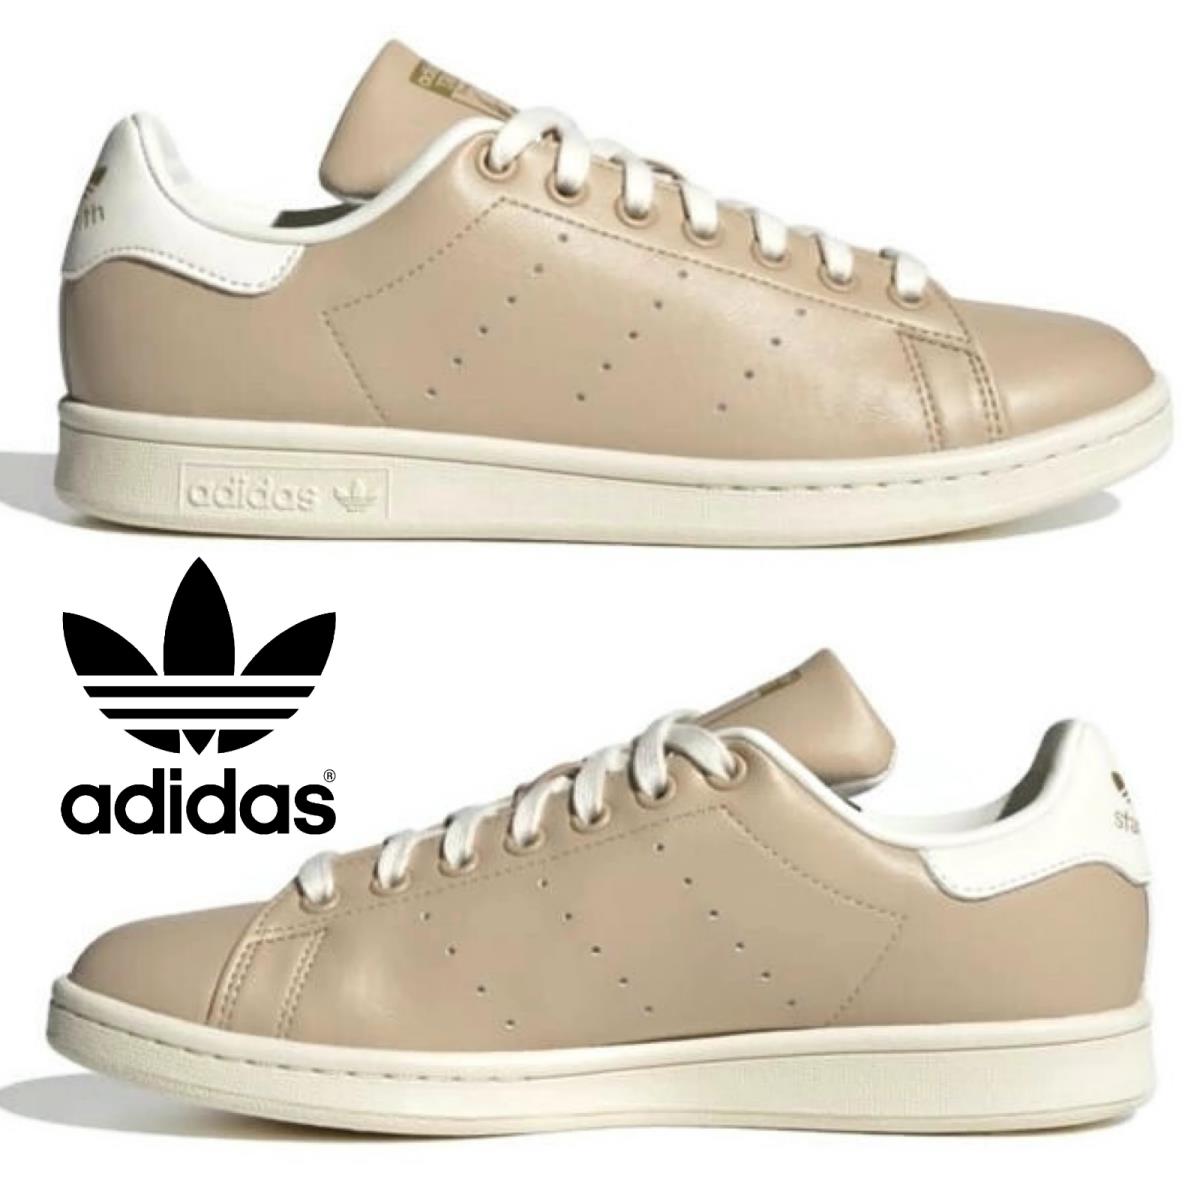 Adidas Originals Stan Smith Women s Sneakers Casual Shoes Sport Gym Beige White